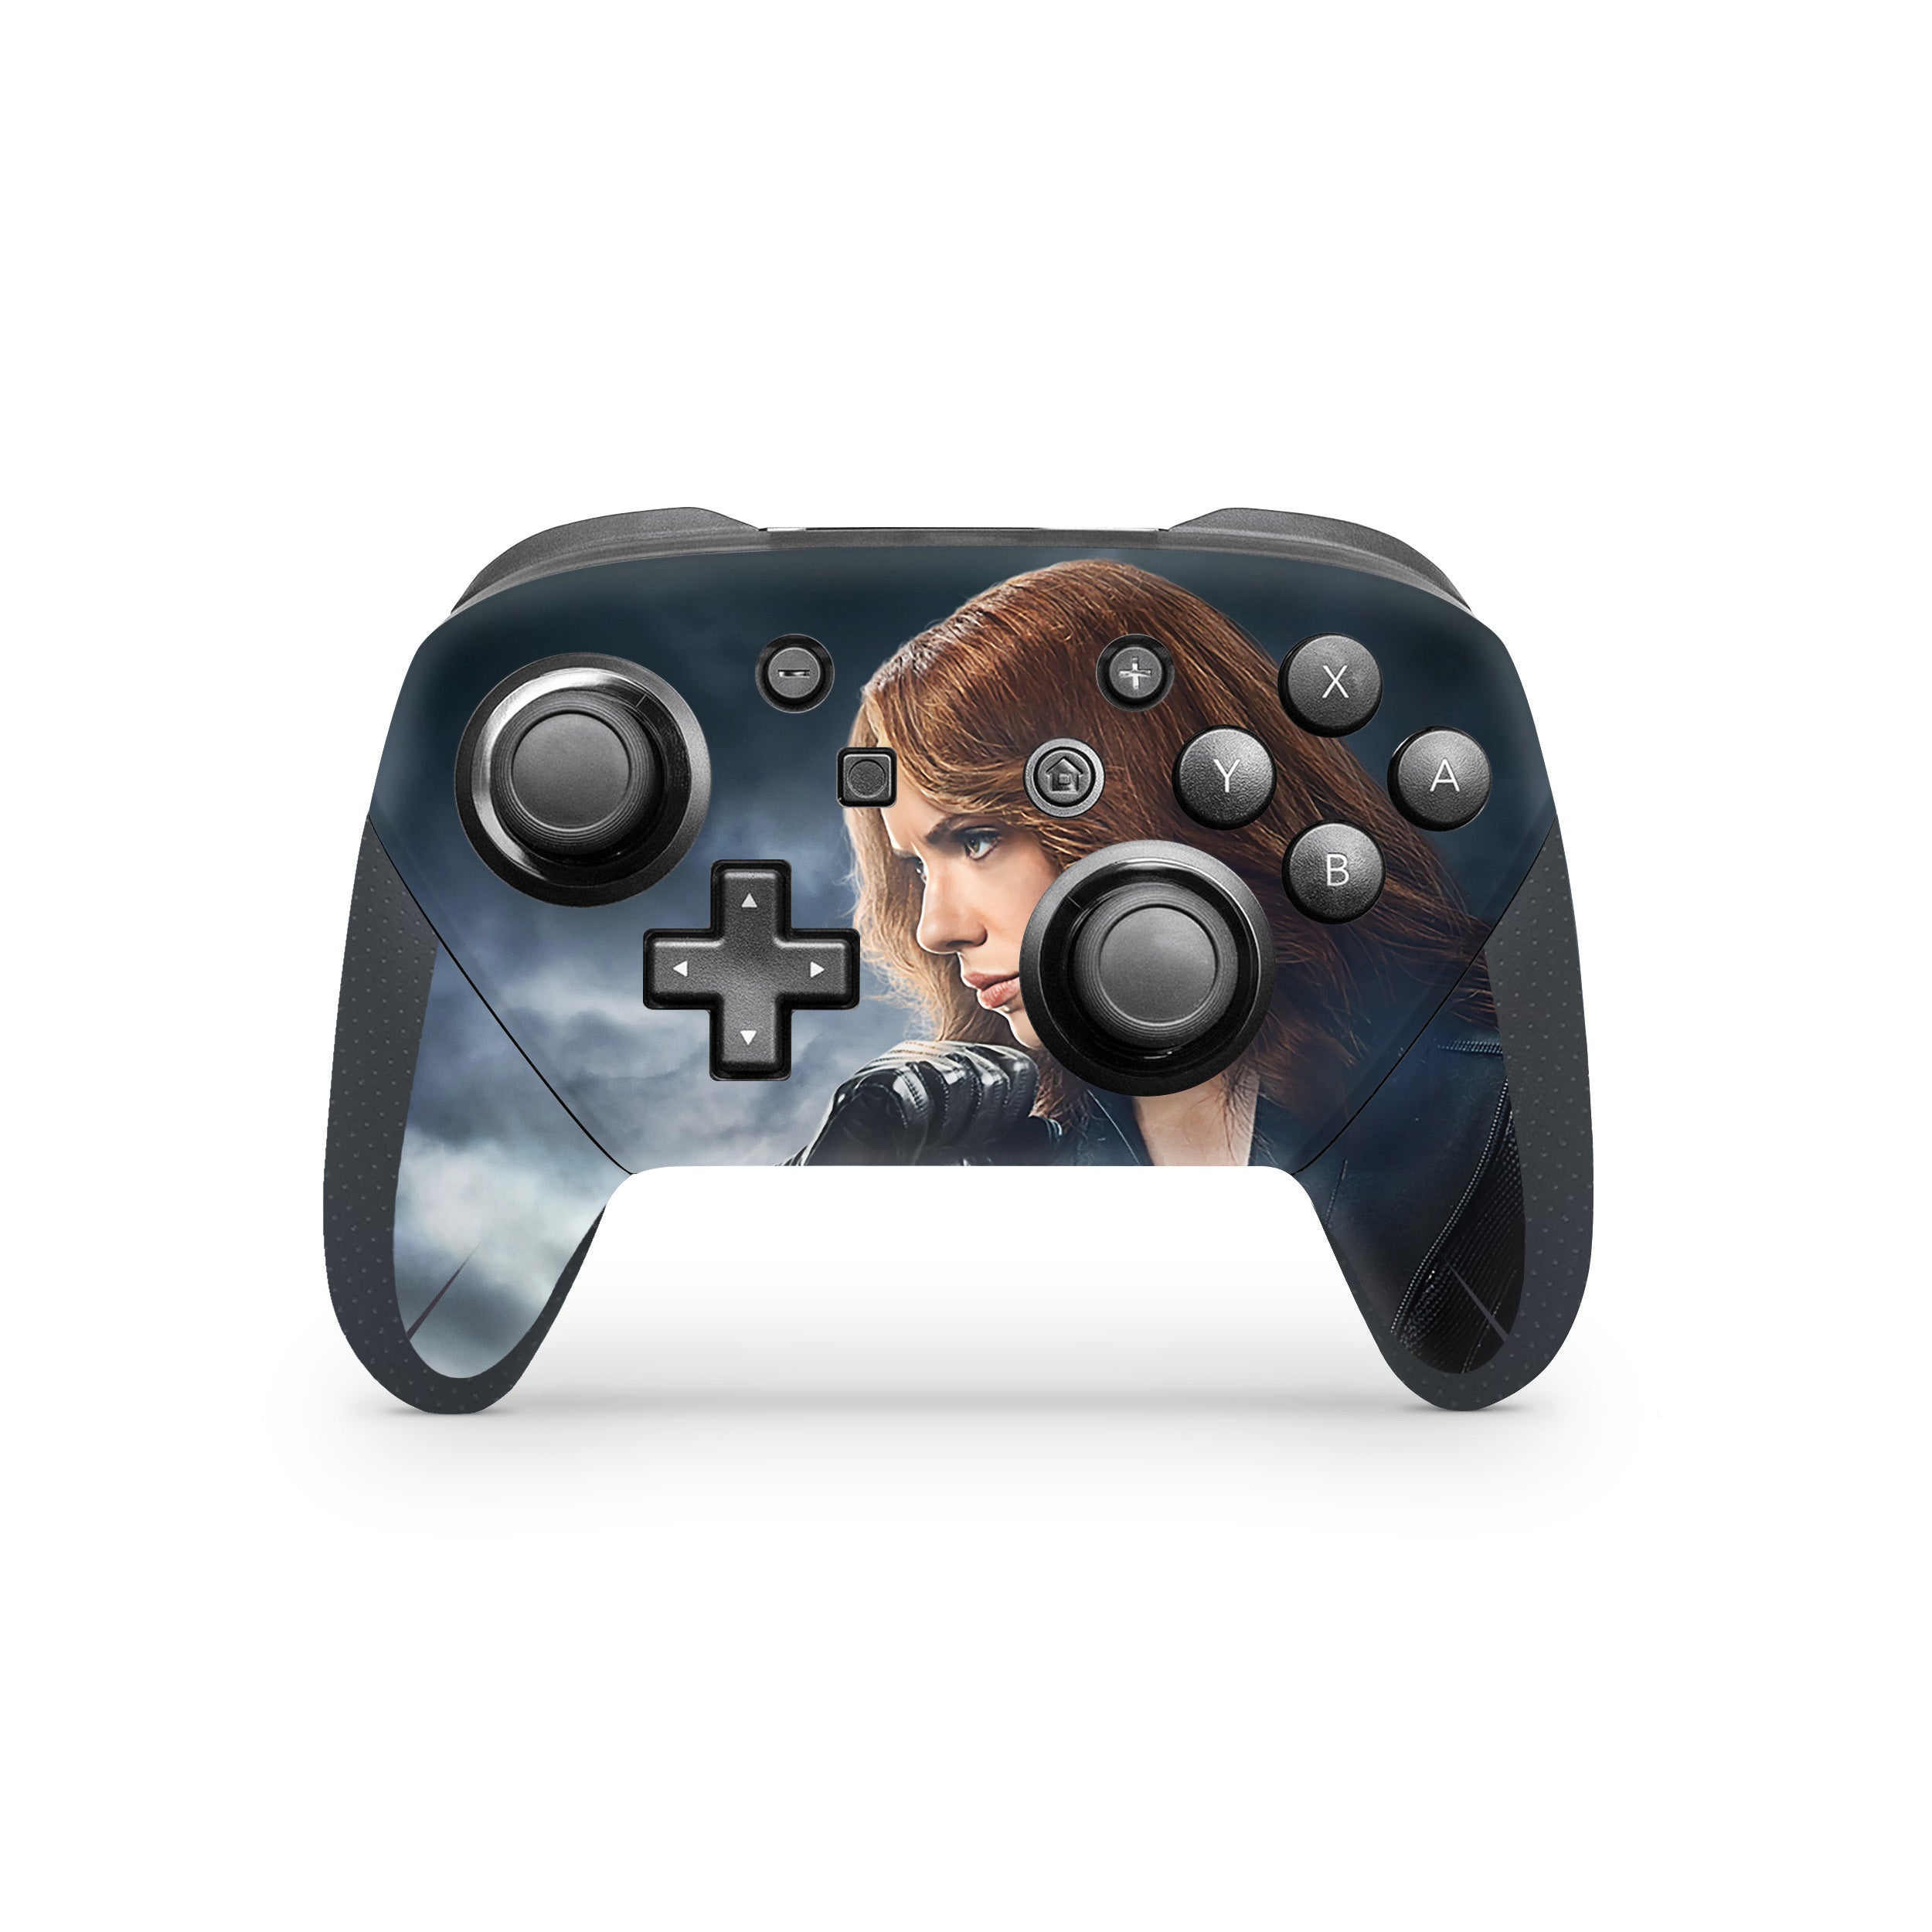 A video game skin featuring a Marvel Black Widow design for the Switch Pro Controller.